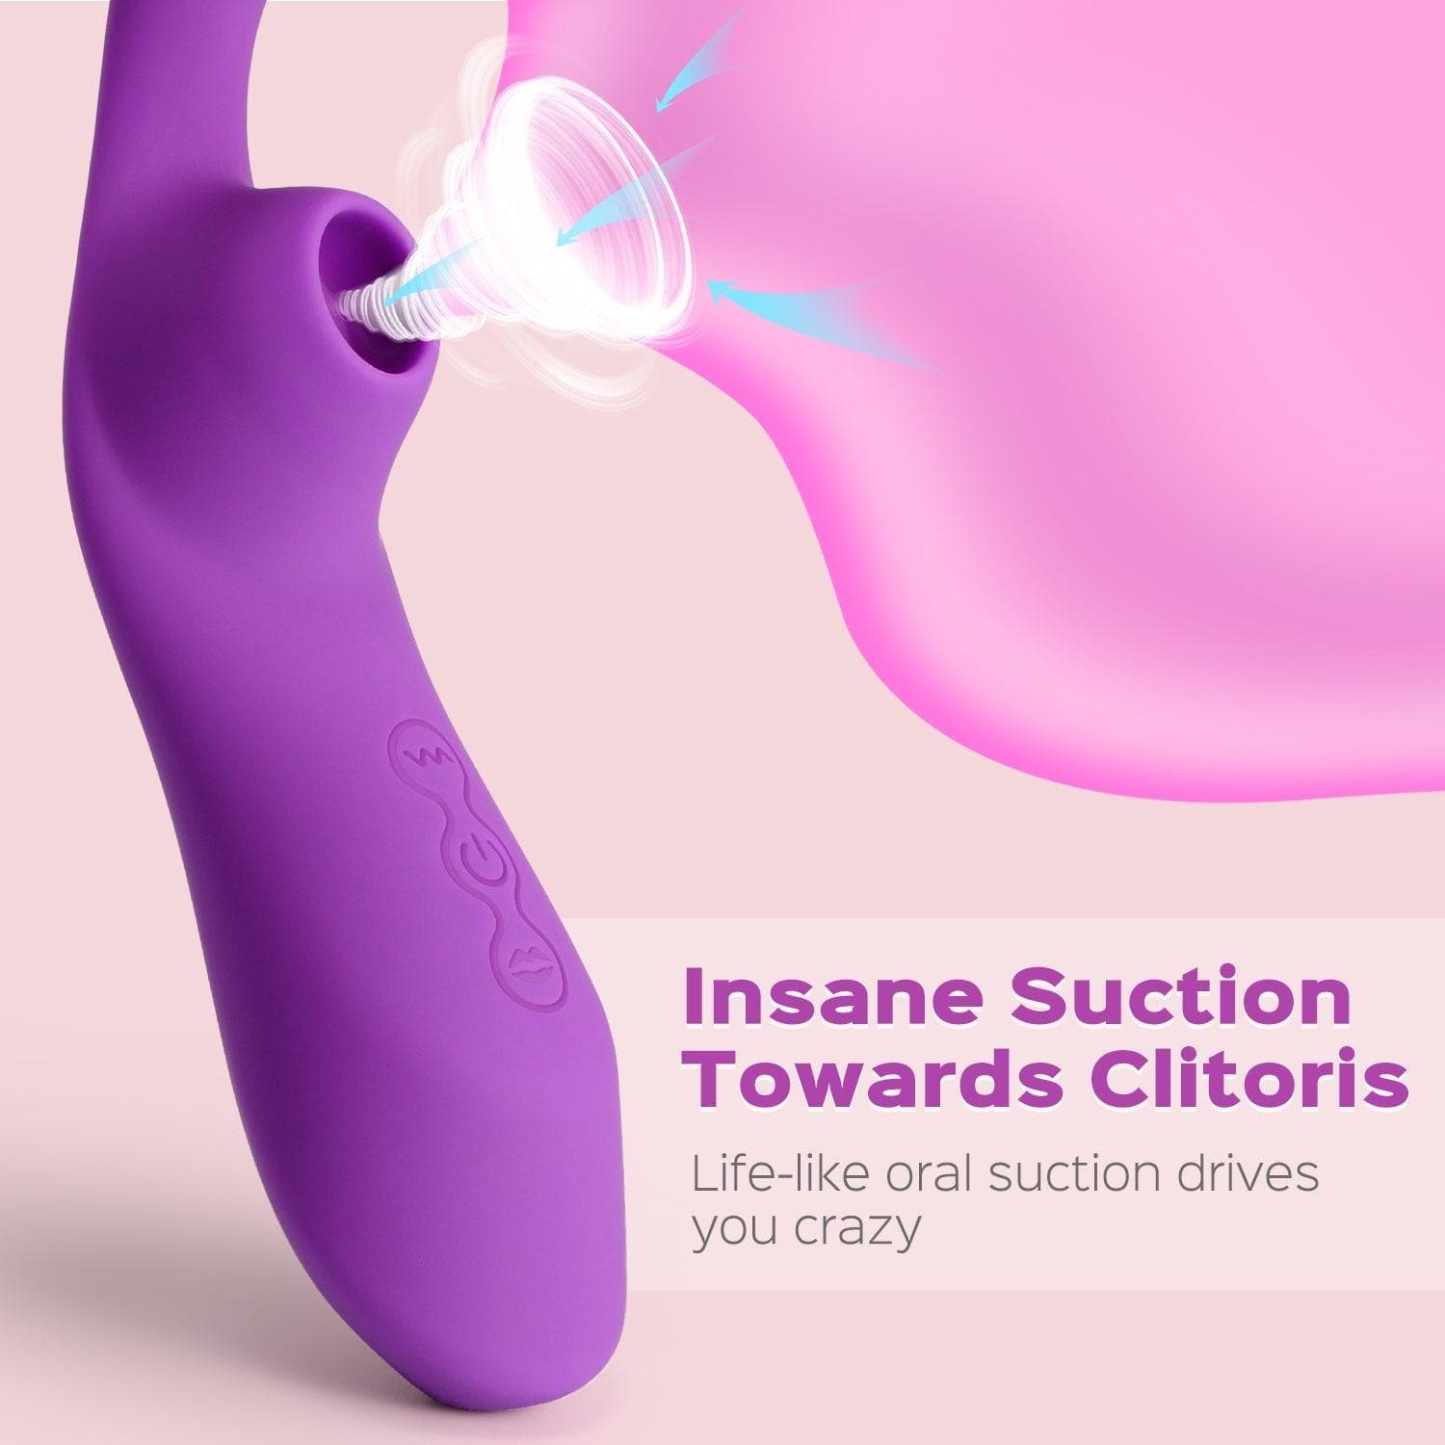 July Multi-Function Clit Sucking Vibrator - Experience Mind-Blowing Orgasms-BestGSpot